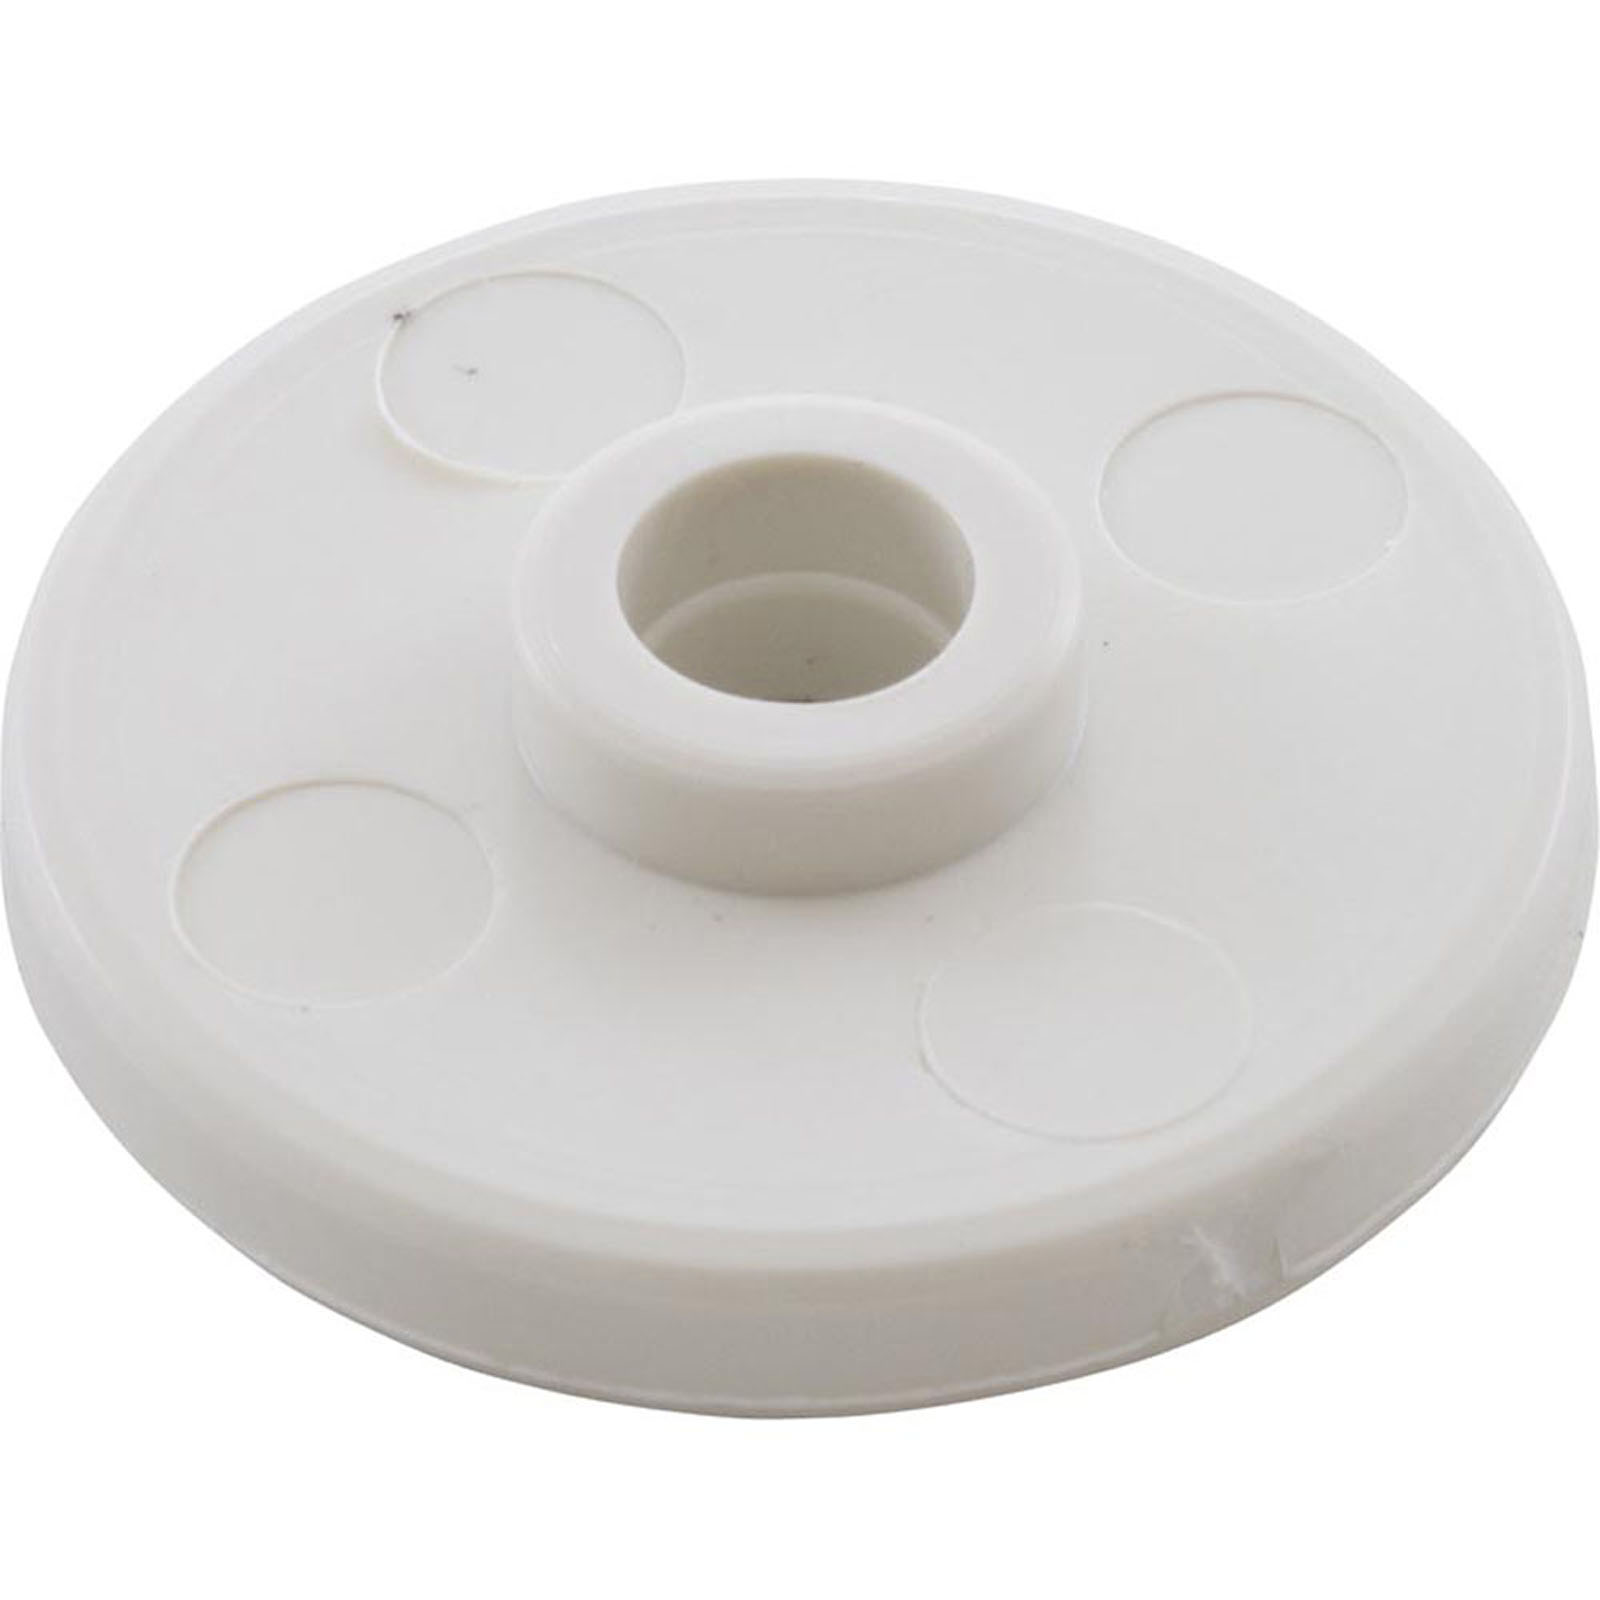 PENTAIR POOL PRODUCTS Bypass Disc, Pentair Vac-Mate Skimmer